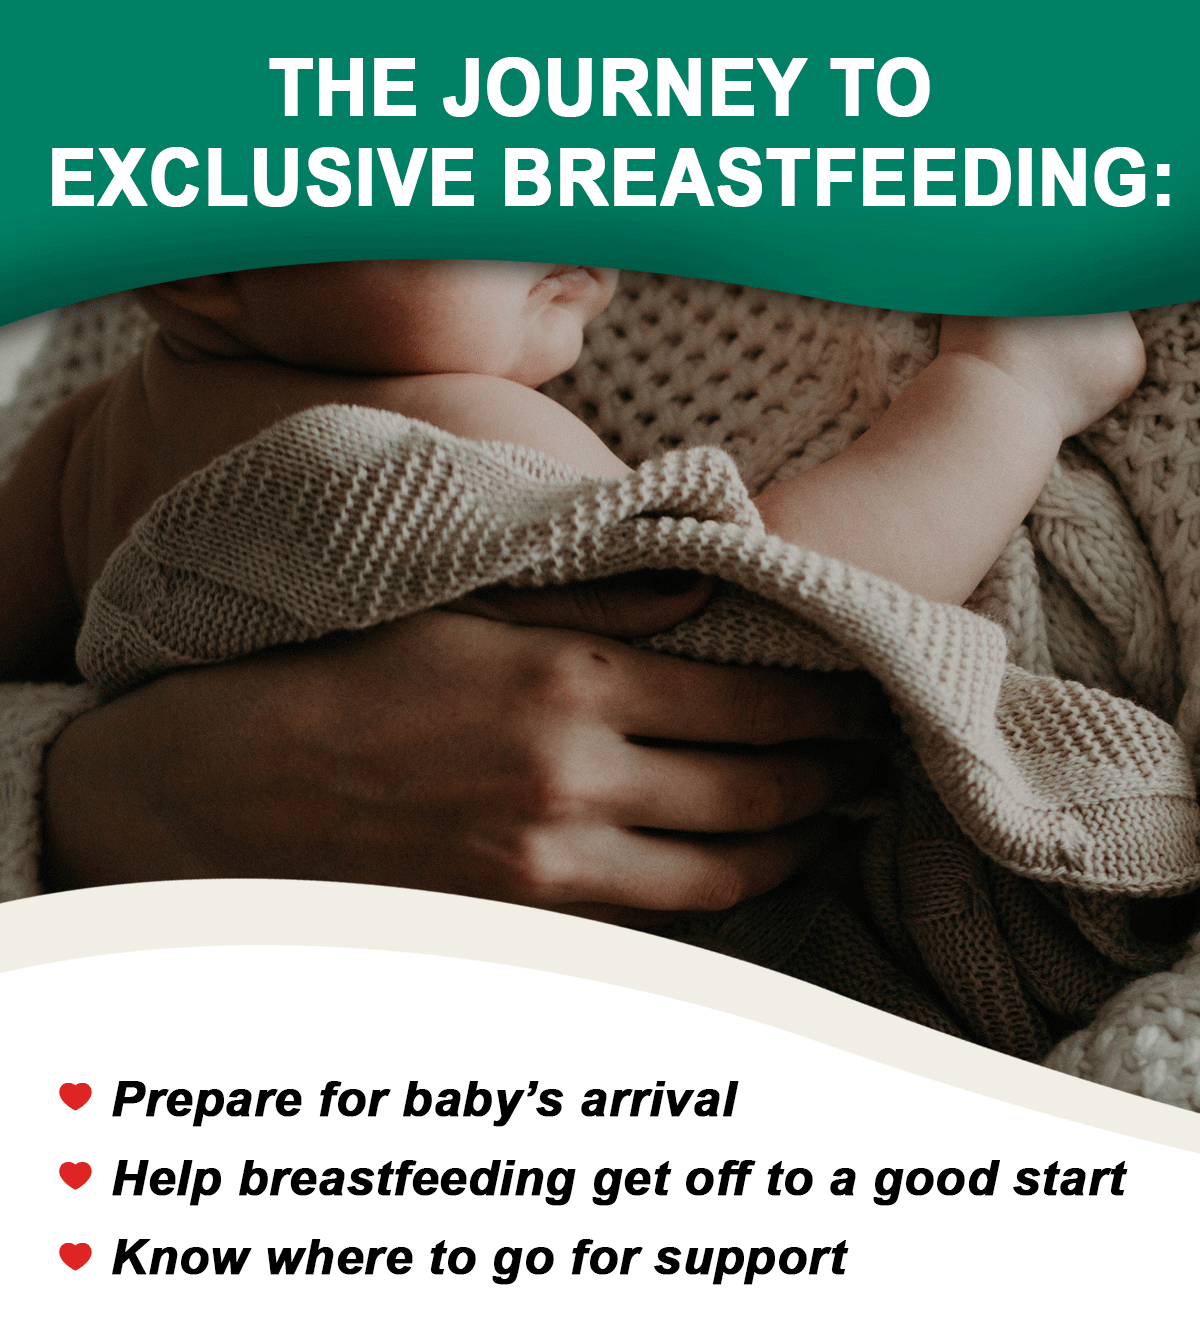 The journey to exclusive breastfeeding